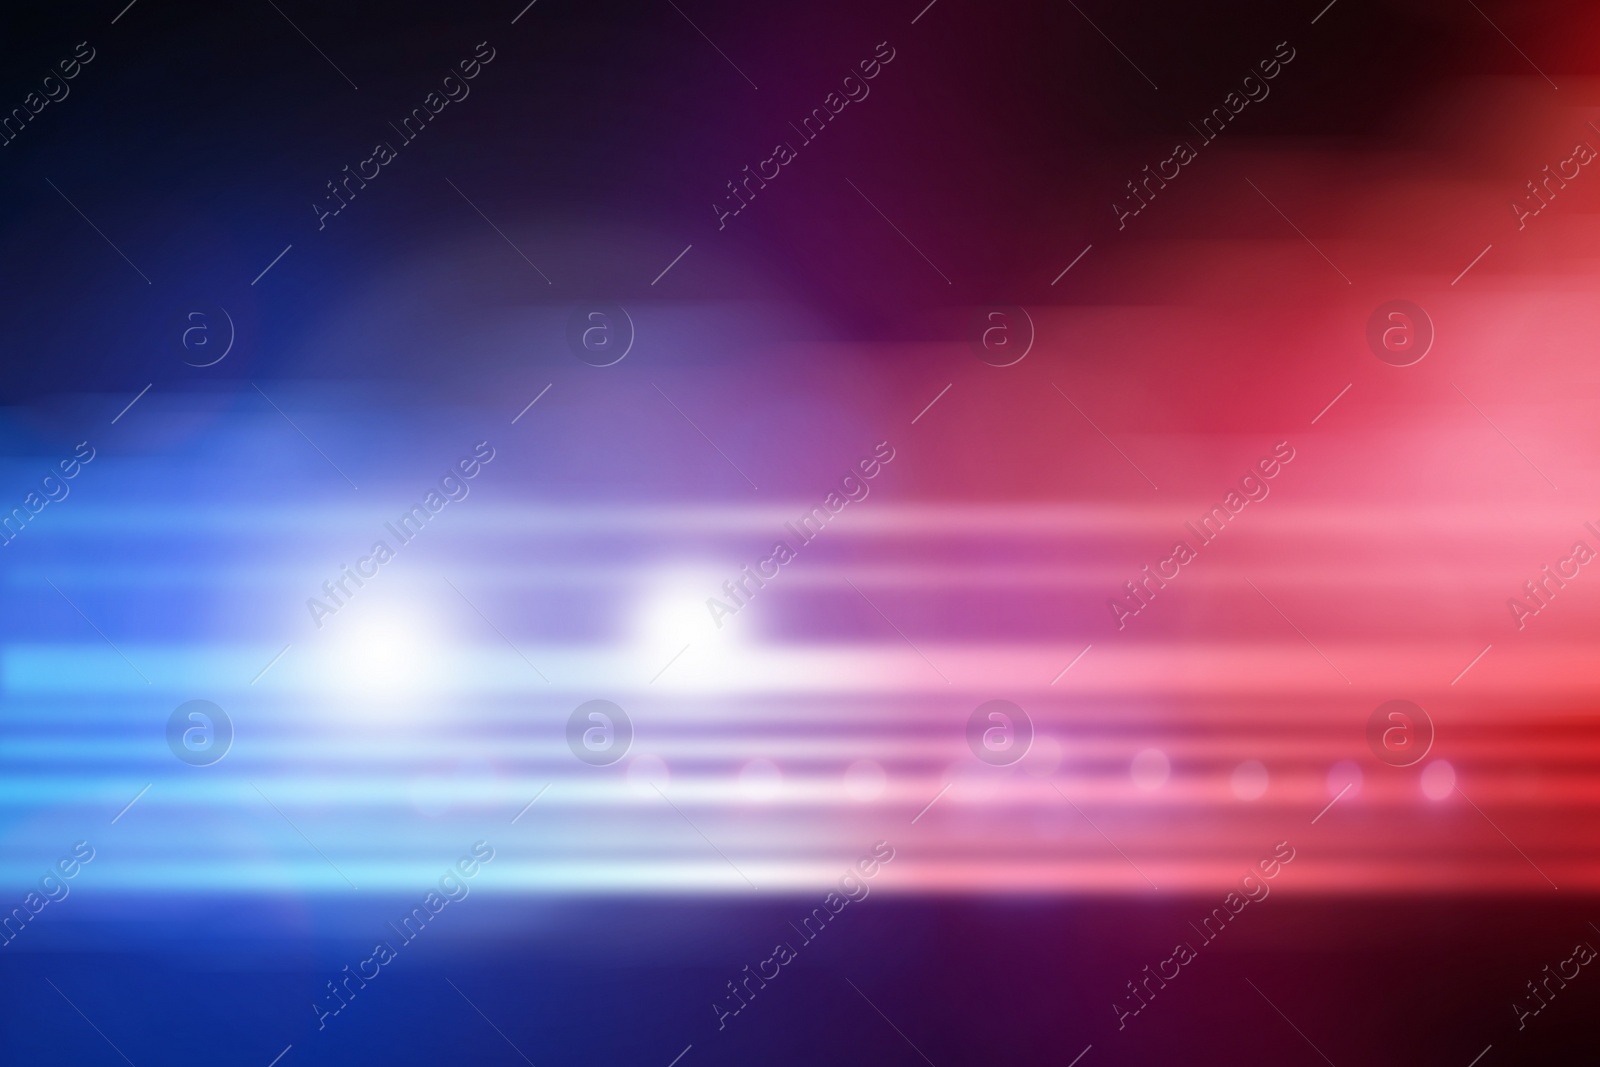 Image of Blurred view of police car on street at night